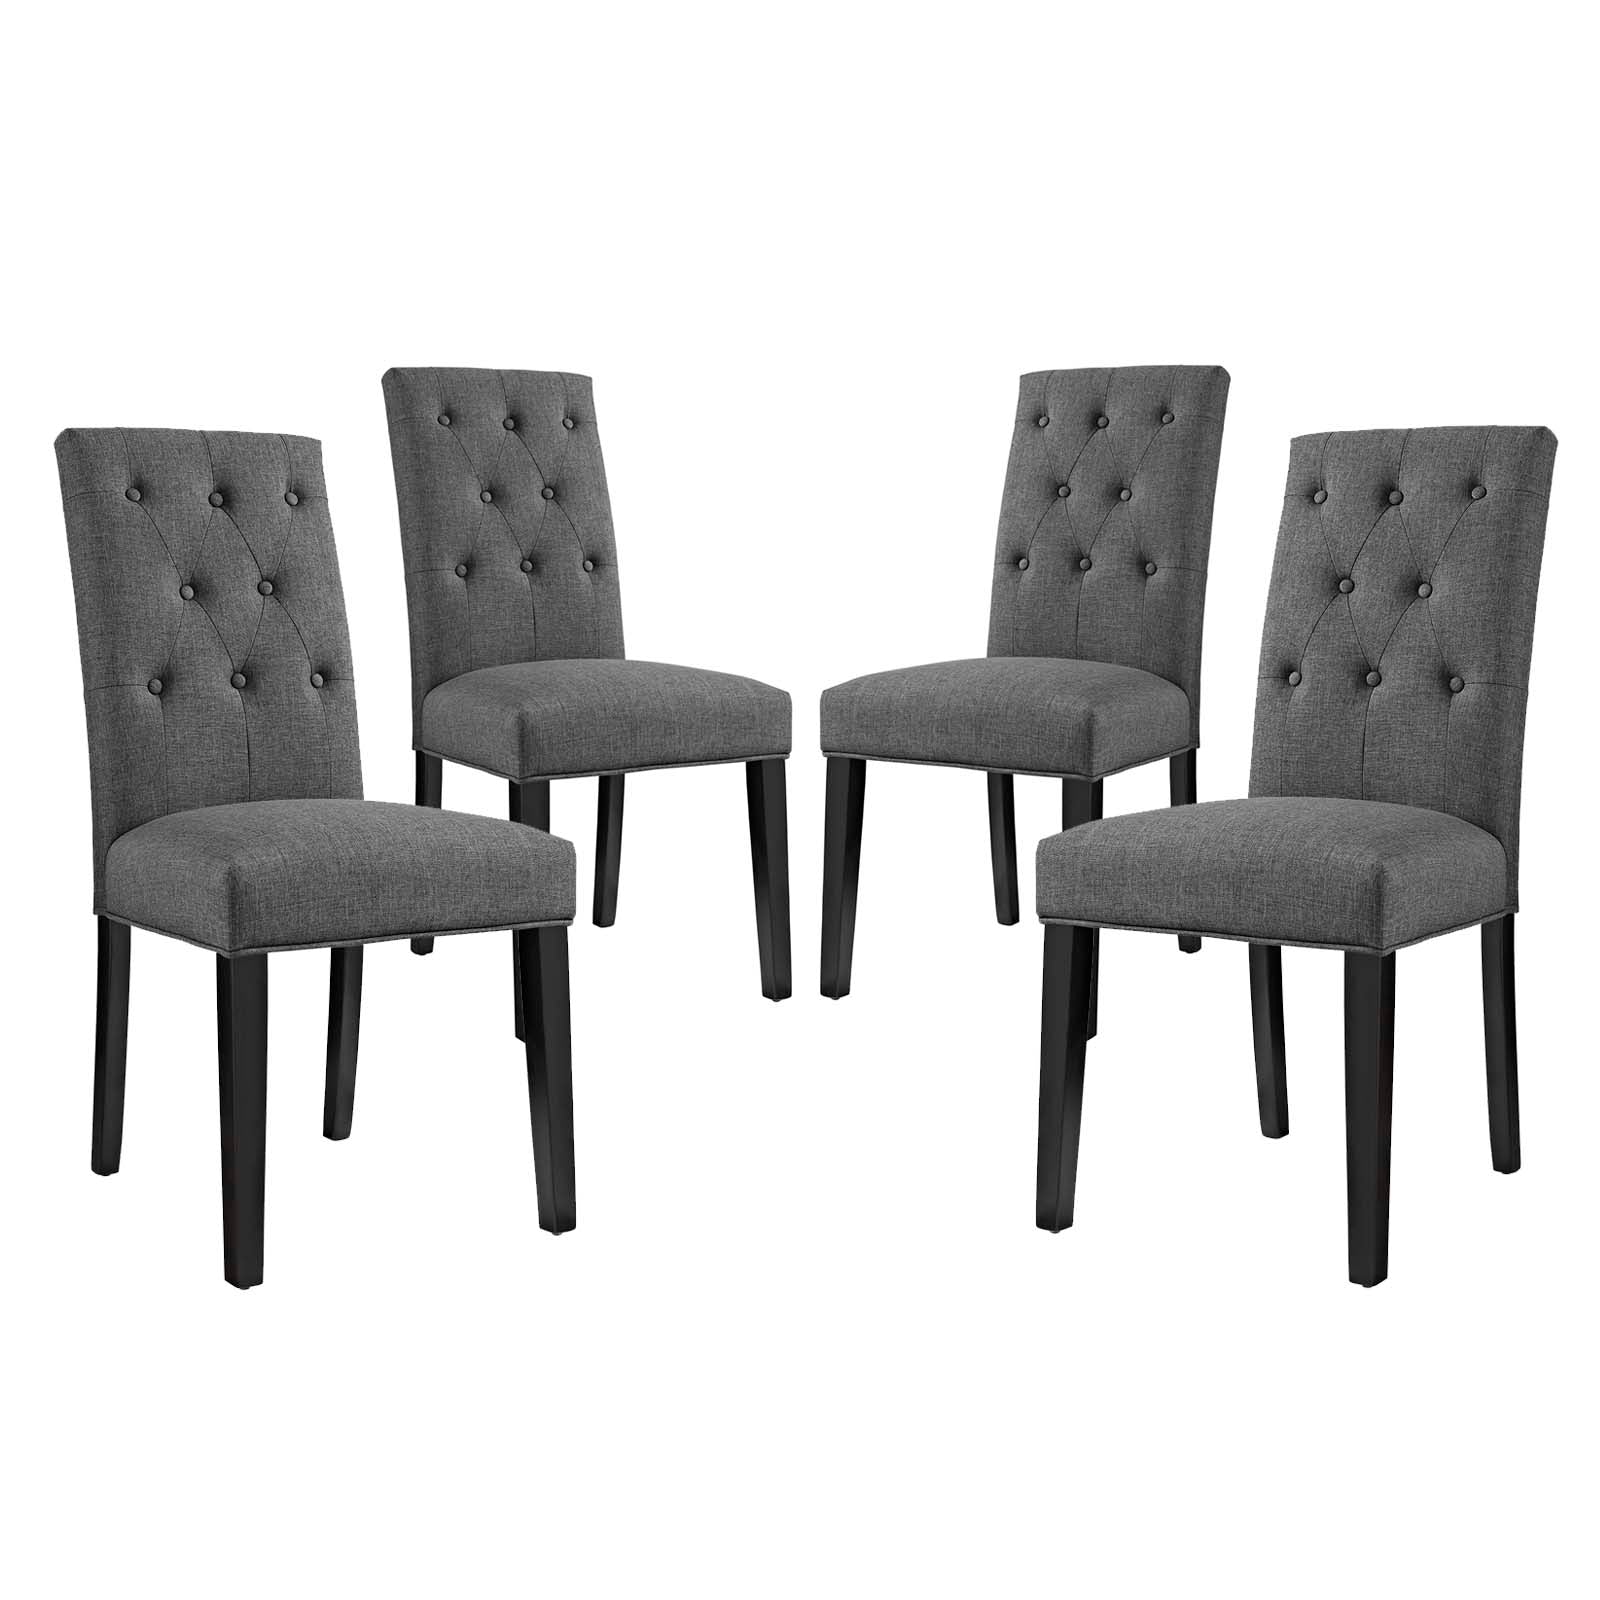 Confer Dining Side Chair Fabric Set of 4 - East Shore Modern Home Furnishings